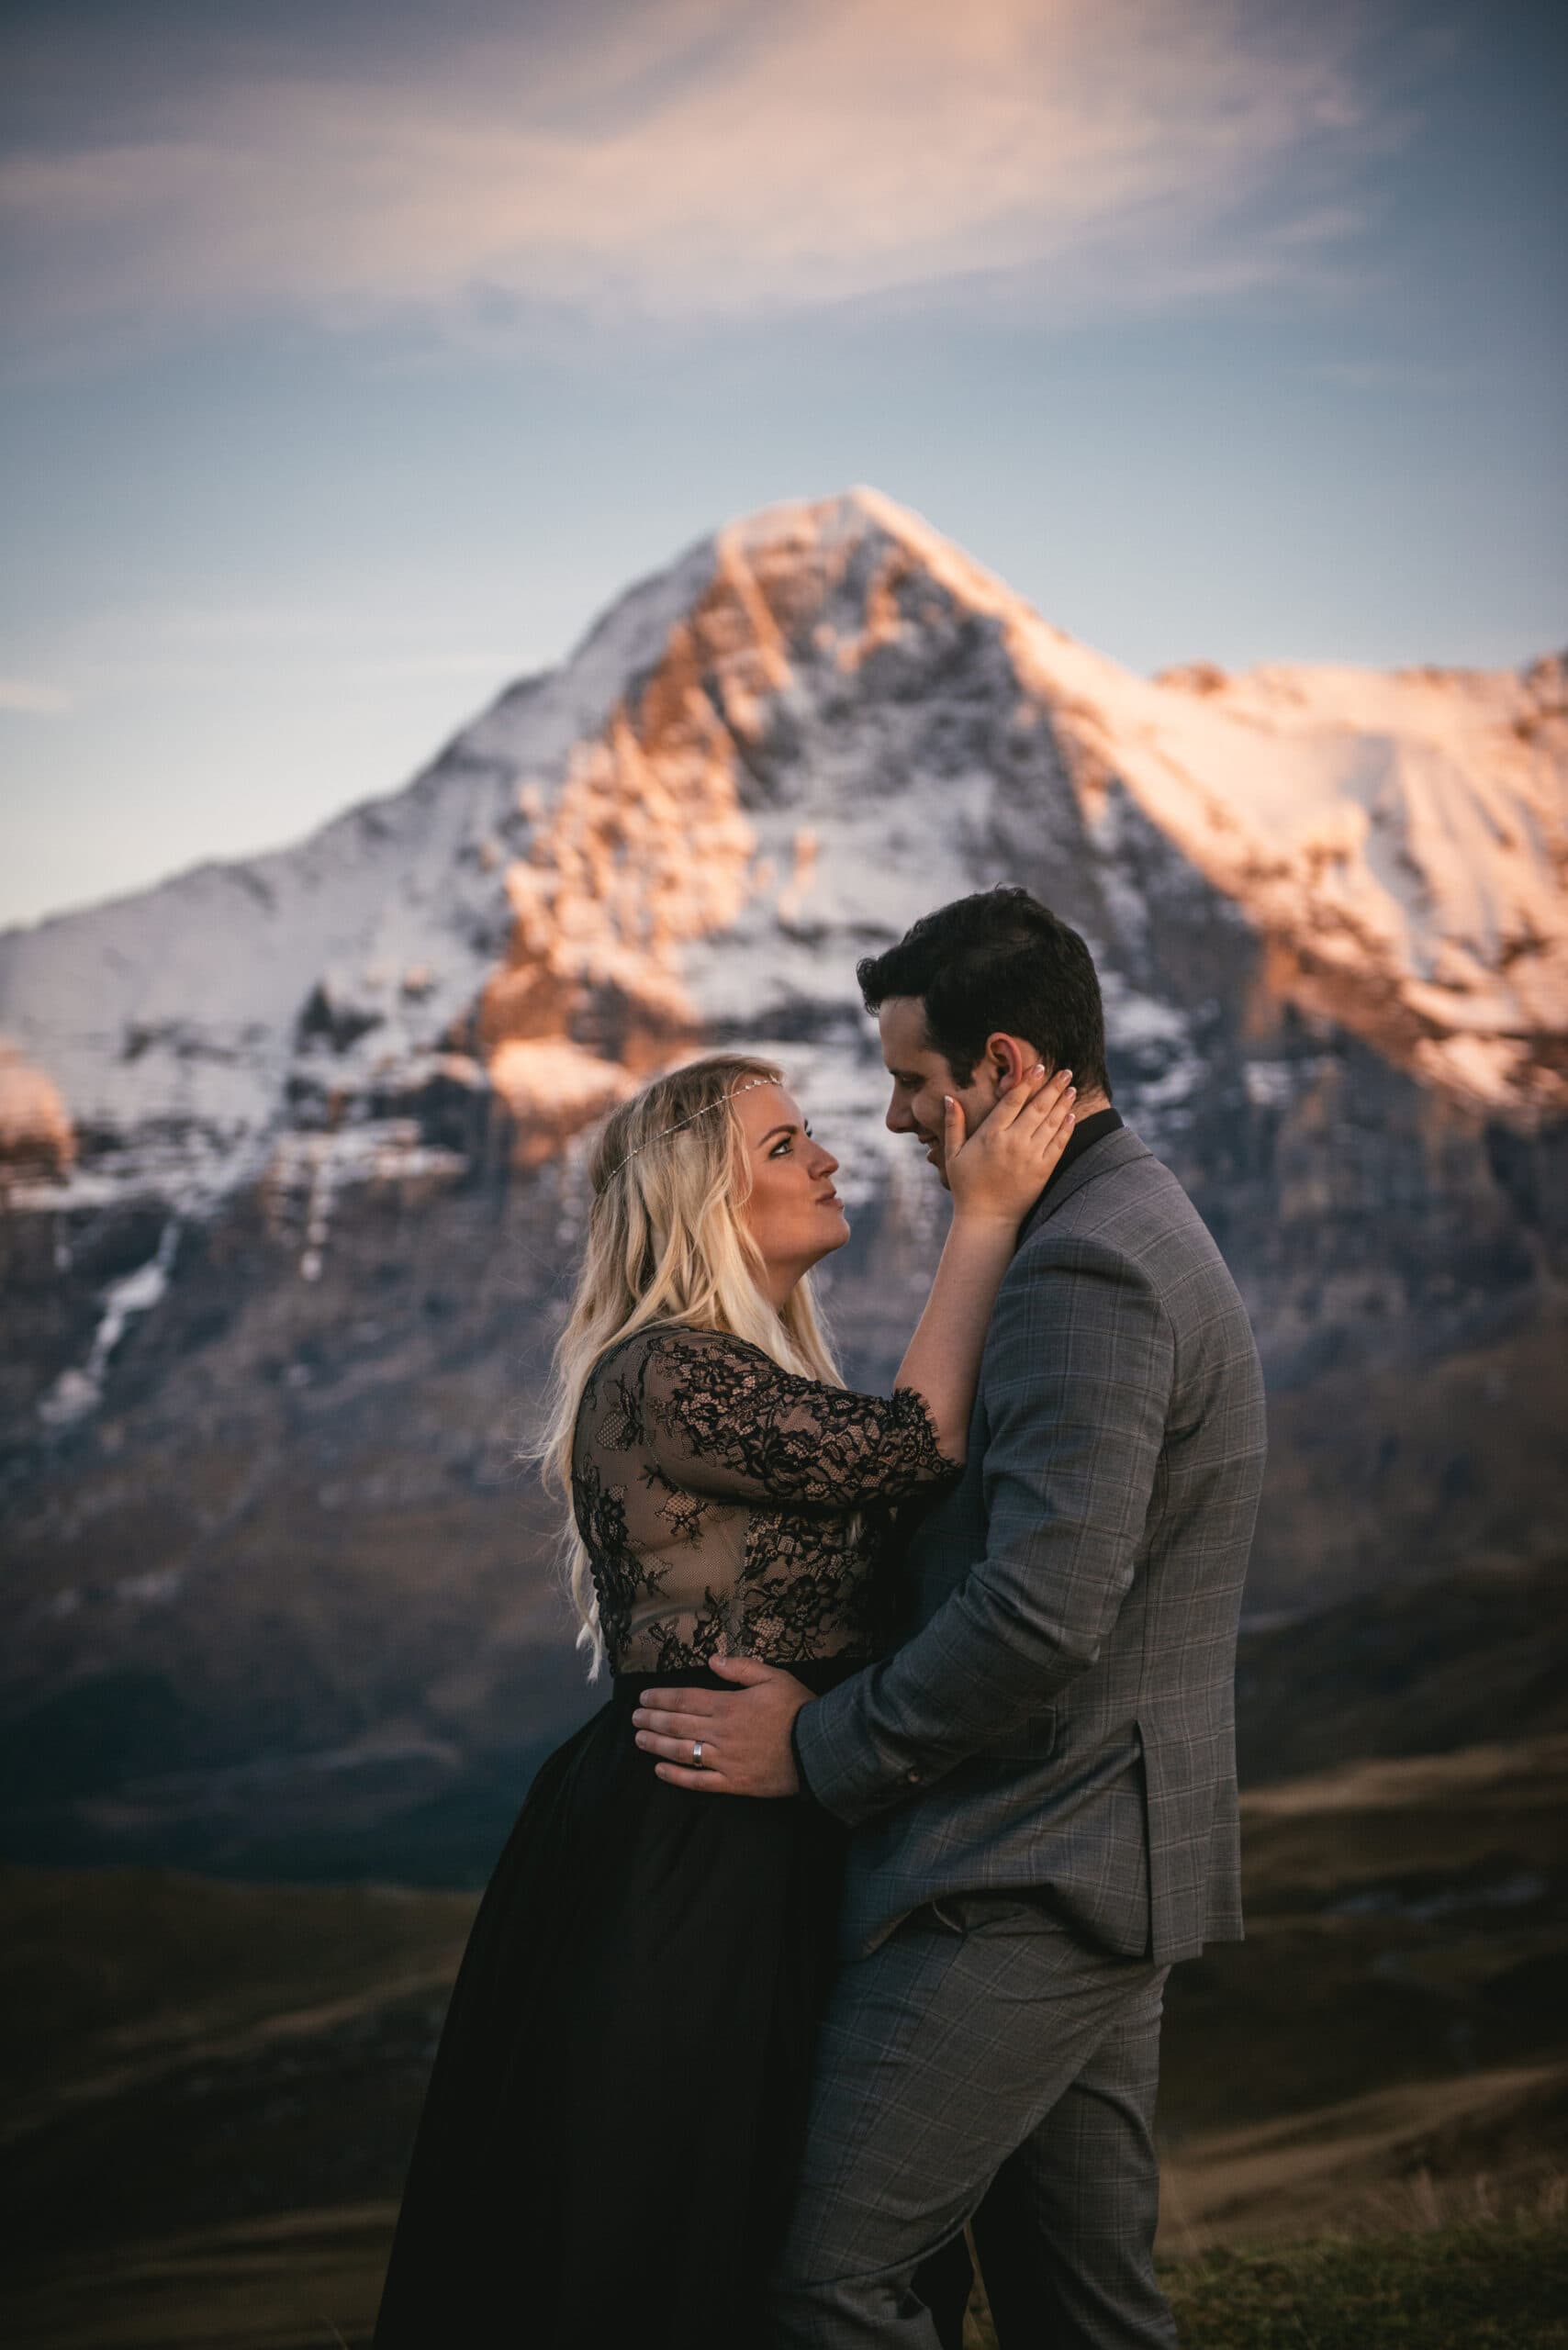 Couple enjoying the alpenglow in the Lauterbrunnen valley at sunset on their elopement day in Switzerland